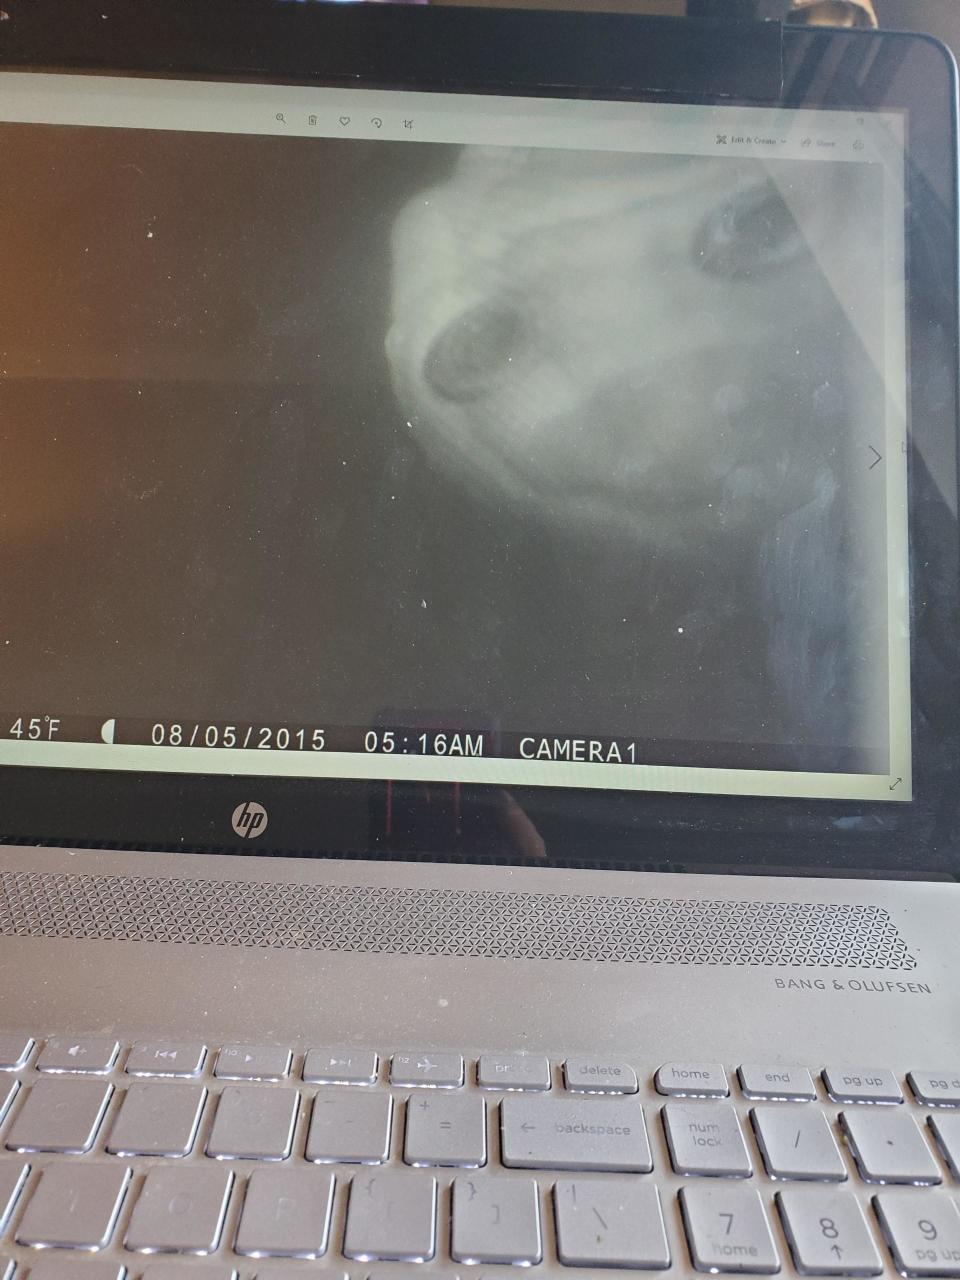 x-ray-like photo looks like there's an alien